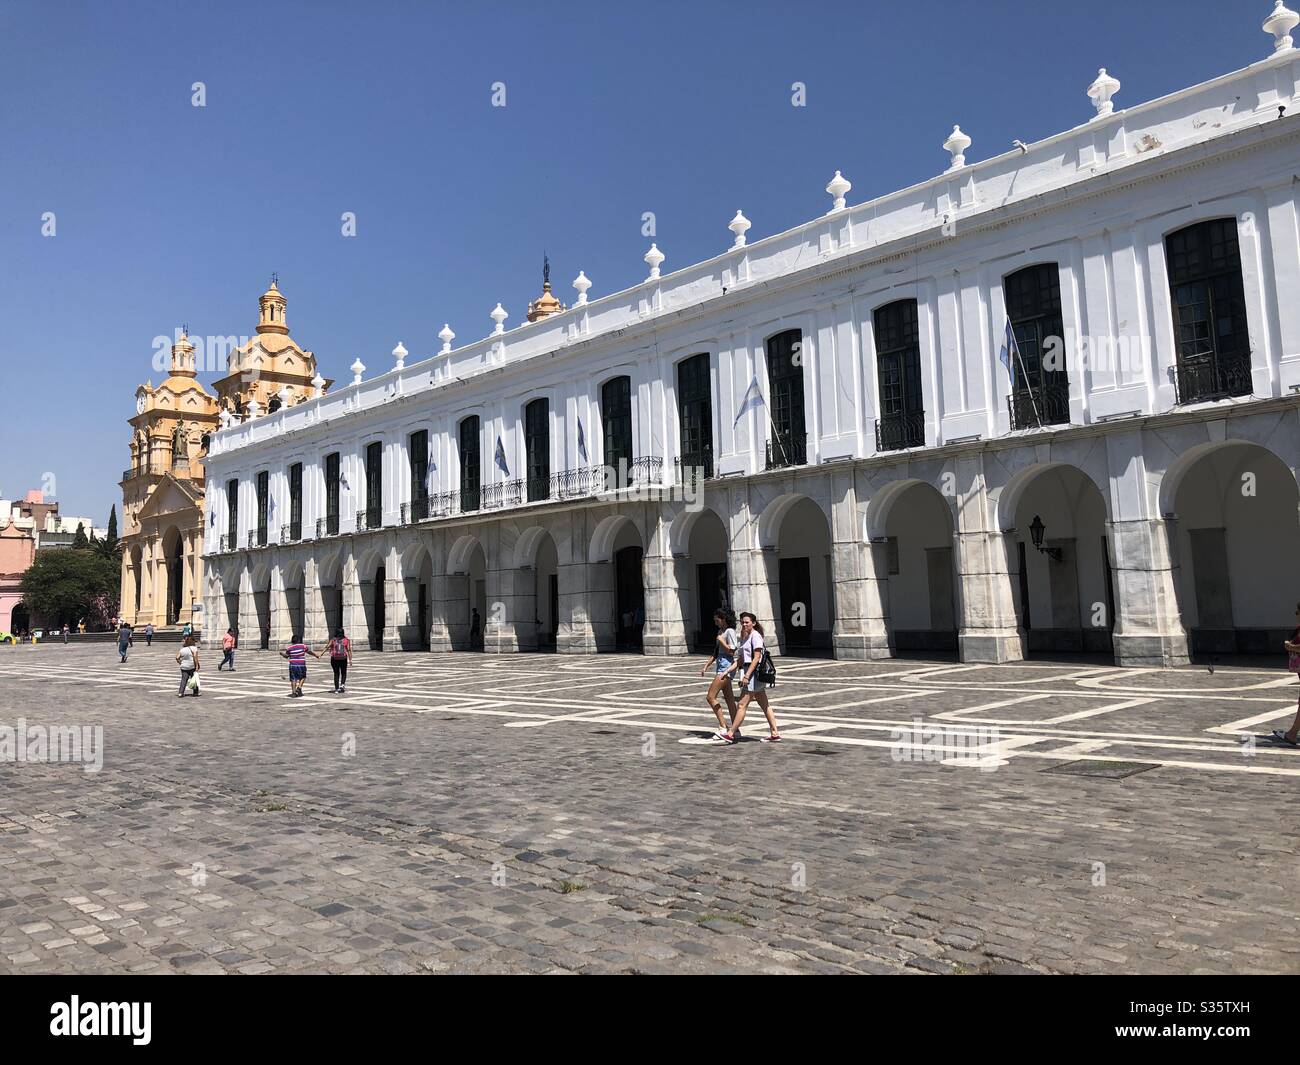 A historical colonial building in Córdoba, Argentina. Stock Photo